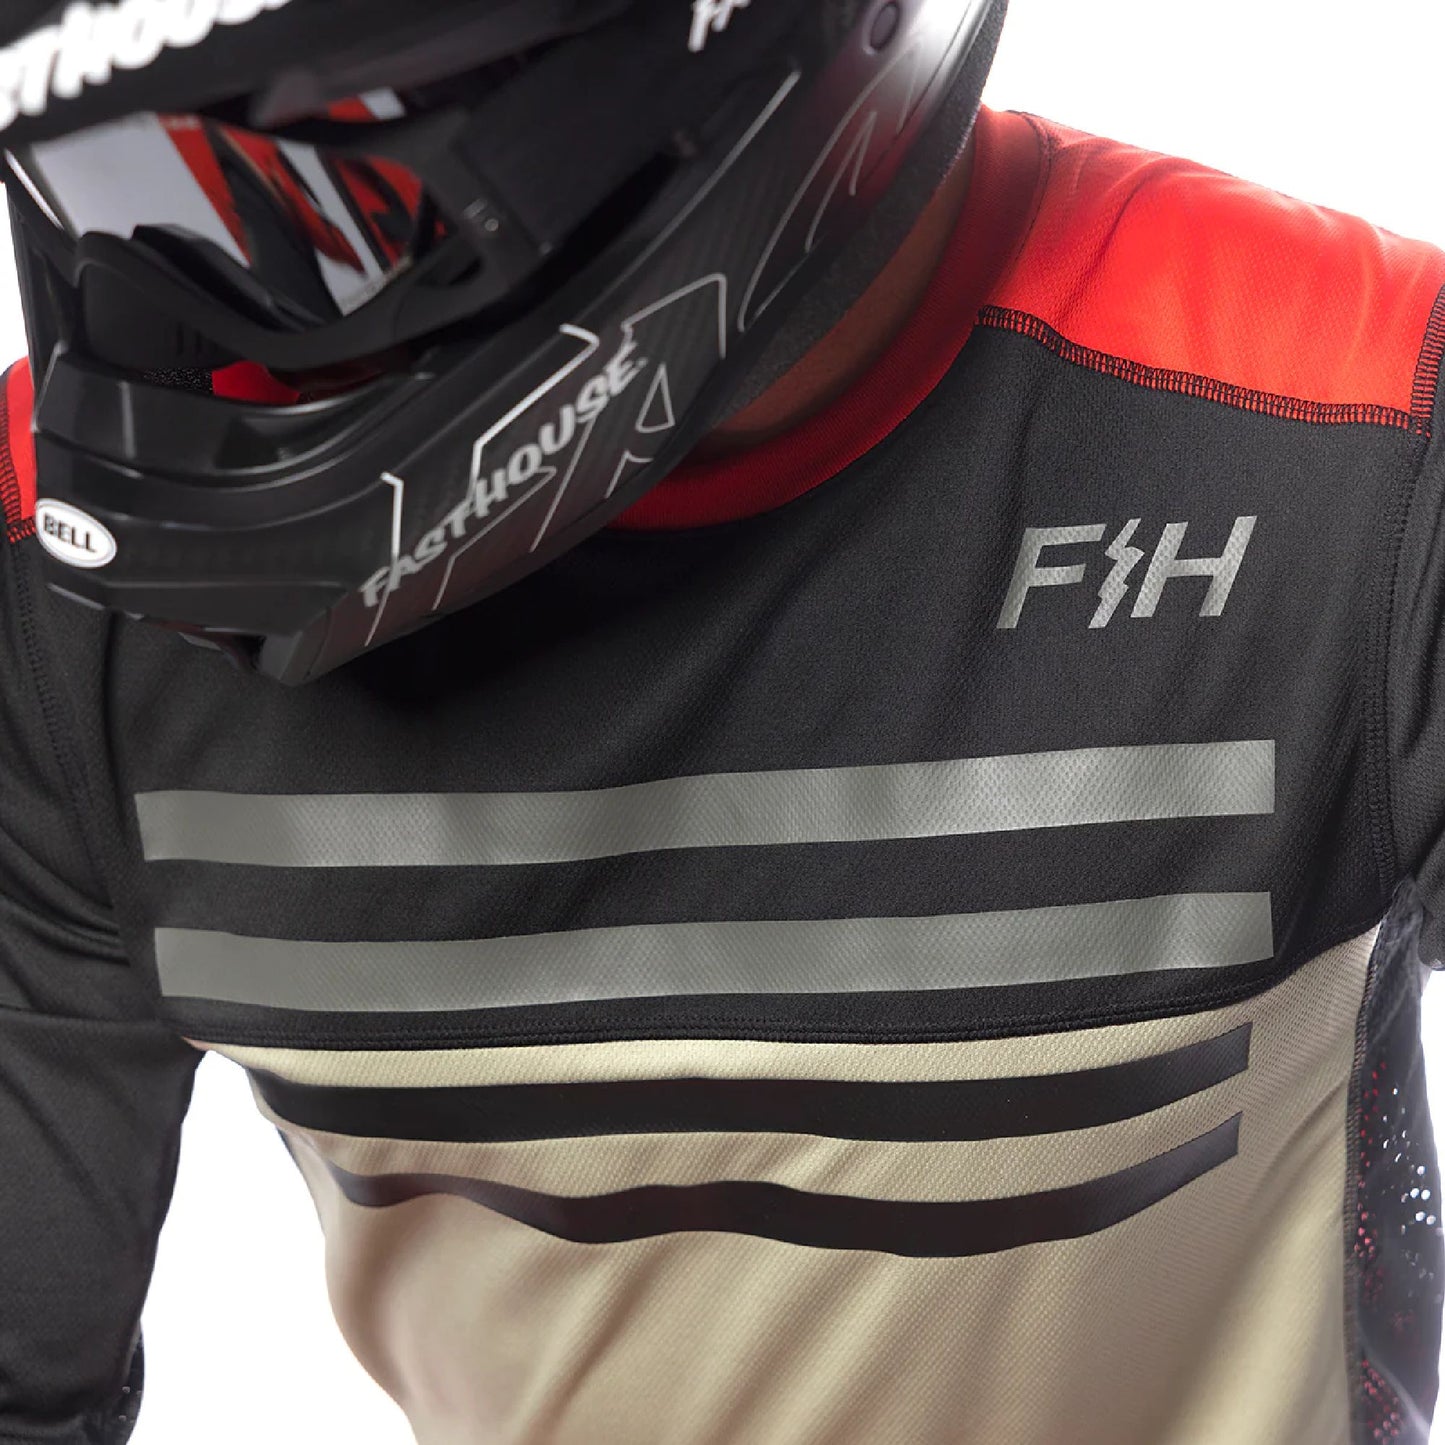 Fasthouse Grindhouse Tempo Jersey Black Infrared Bike Jerseys